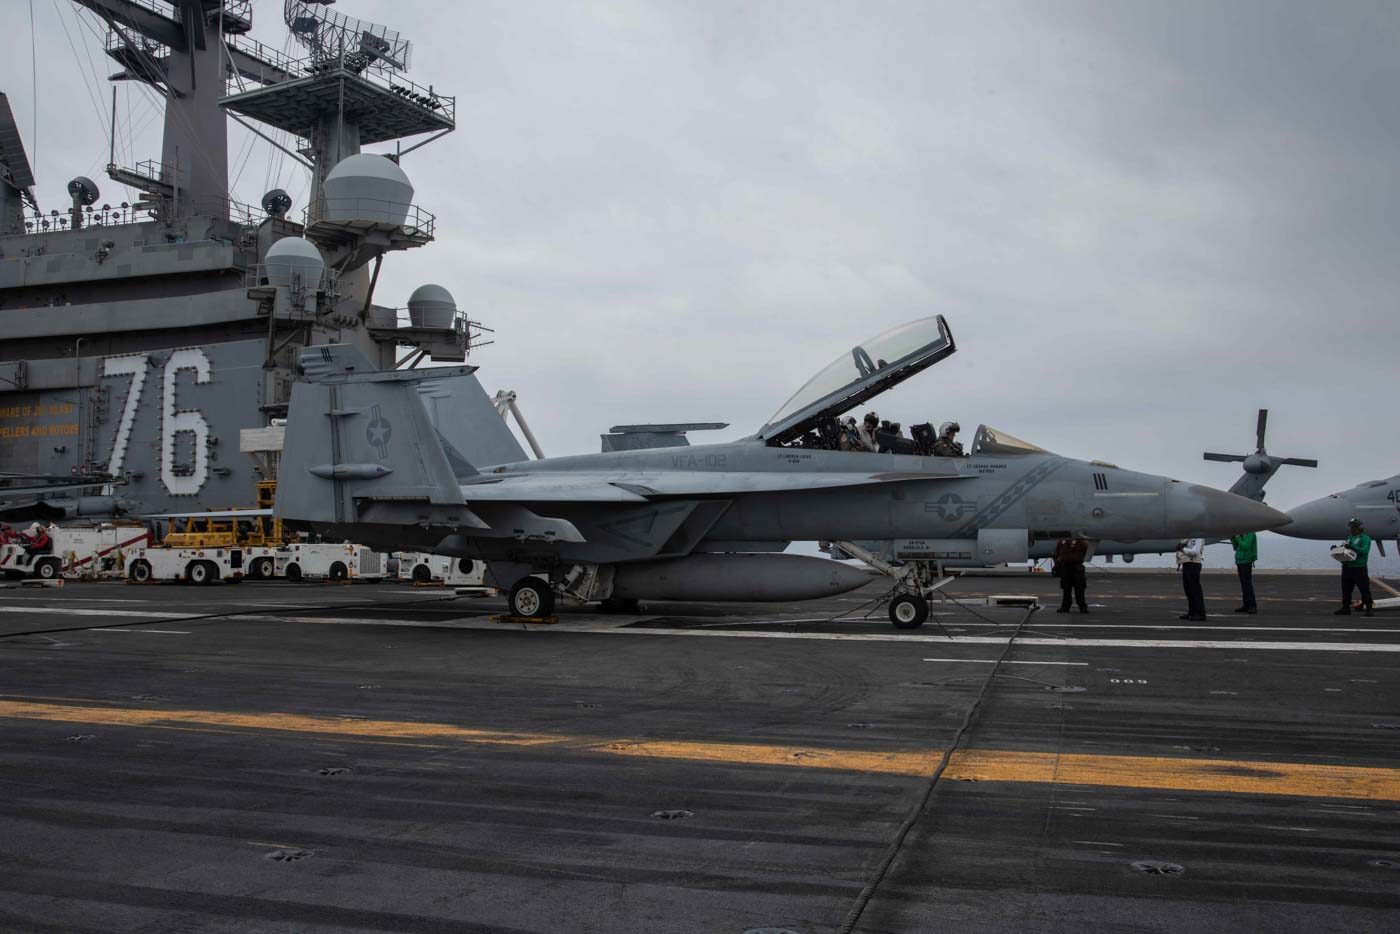 SUPER HORNET. An F/A-18F Super Hornet attached to Strike Fighter Squadron 102 on the flight deck of the aircraft carrier USS Ronald Reagan. U.S Navy photo by Mass Communication Specialist 2nd Class Samantha Jetzer 